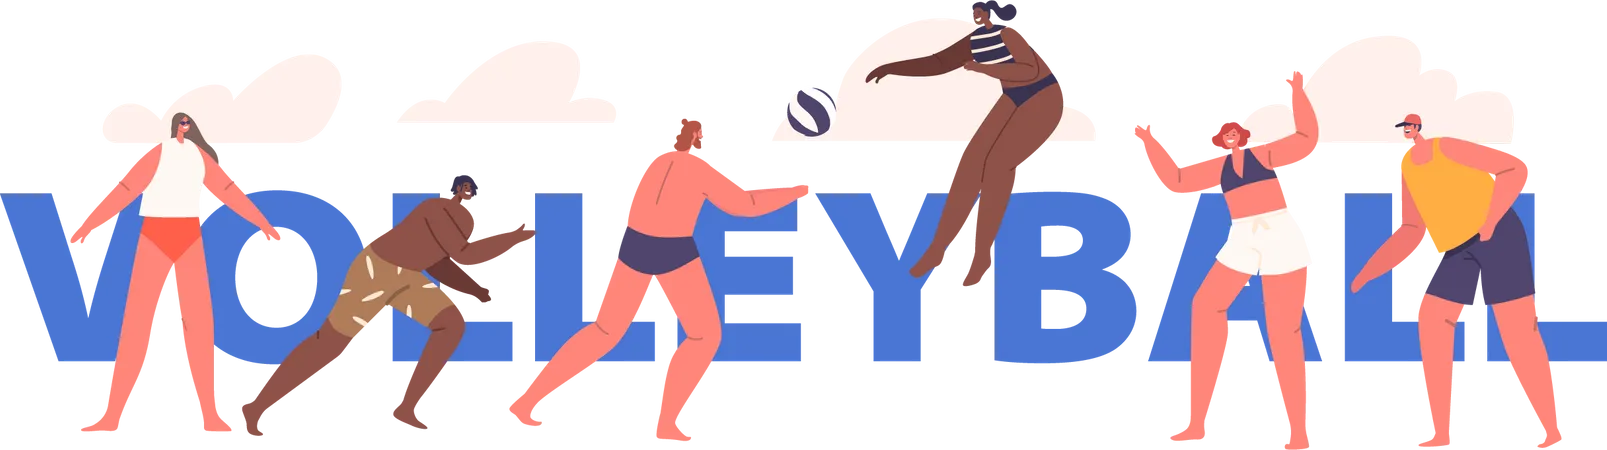 People Enjoy Beach Volleyball By Diving Spiking And Serving The Ball On Sandy Shores Characters Creating A Thrilling And Energetic Outdoor Sport Cartoon Vector Poster Banner Or Flyer Concept Illustration